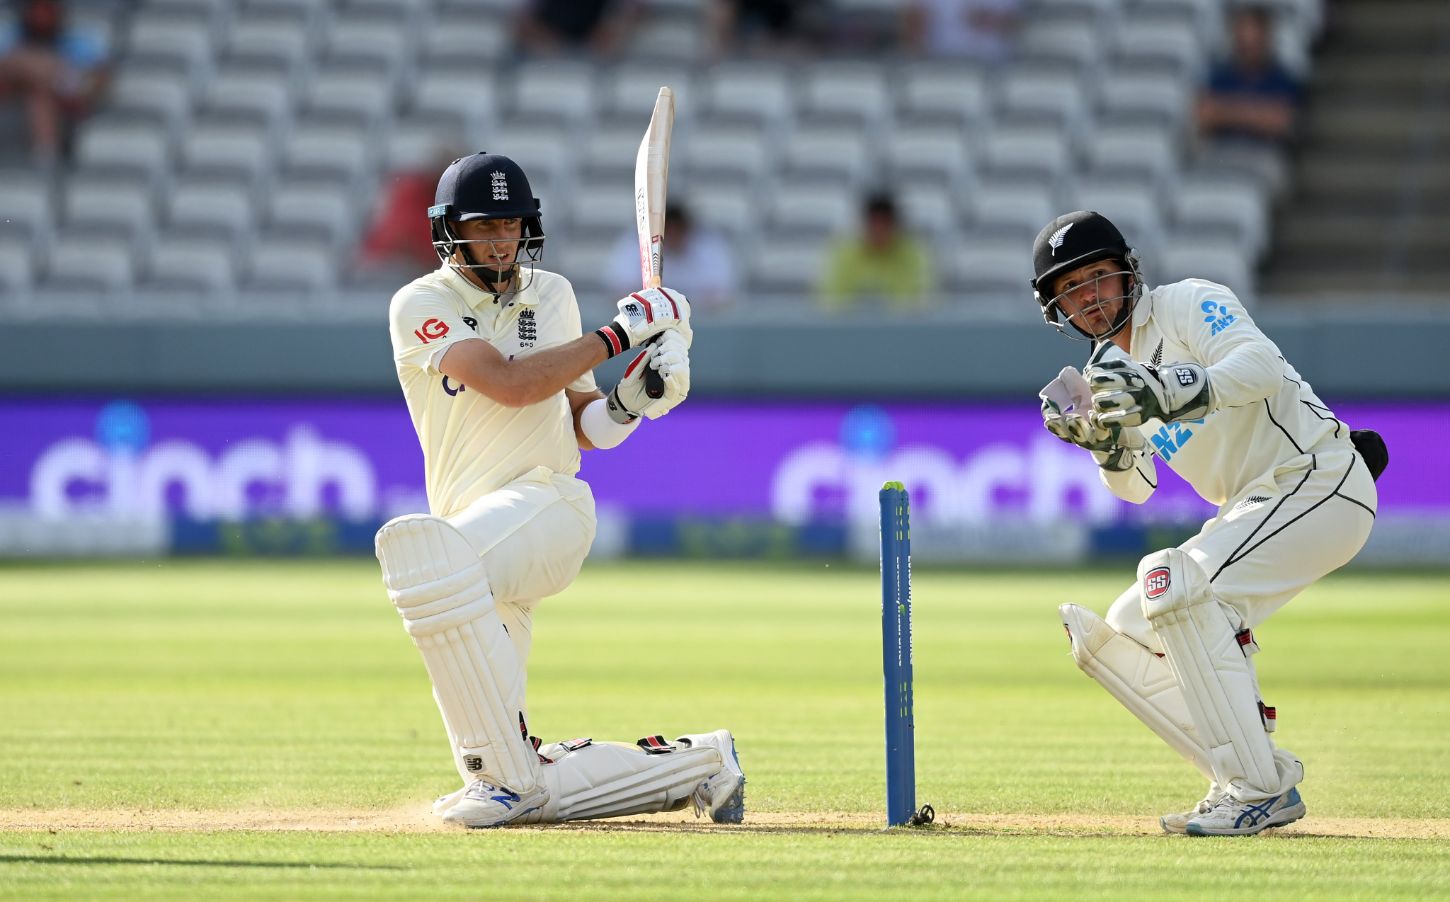 ENG vs NZ | 1st Test: Joe Root defends not going for unrealistic win on final day